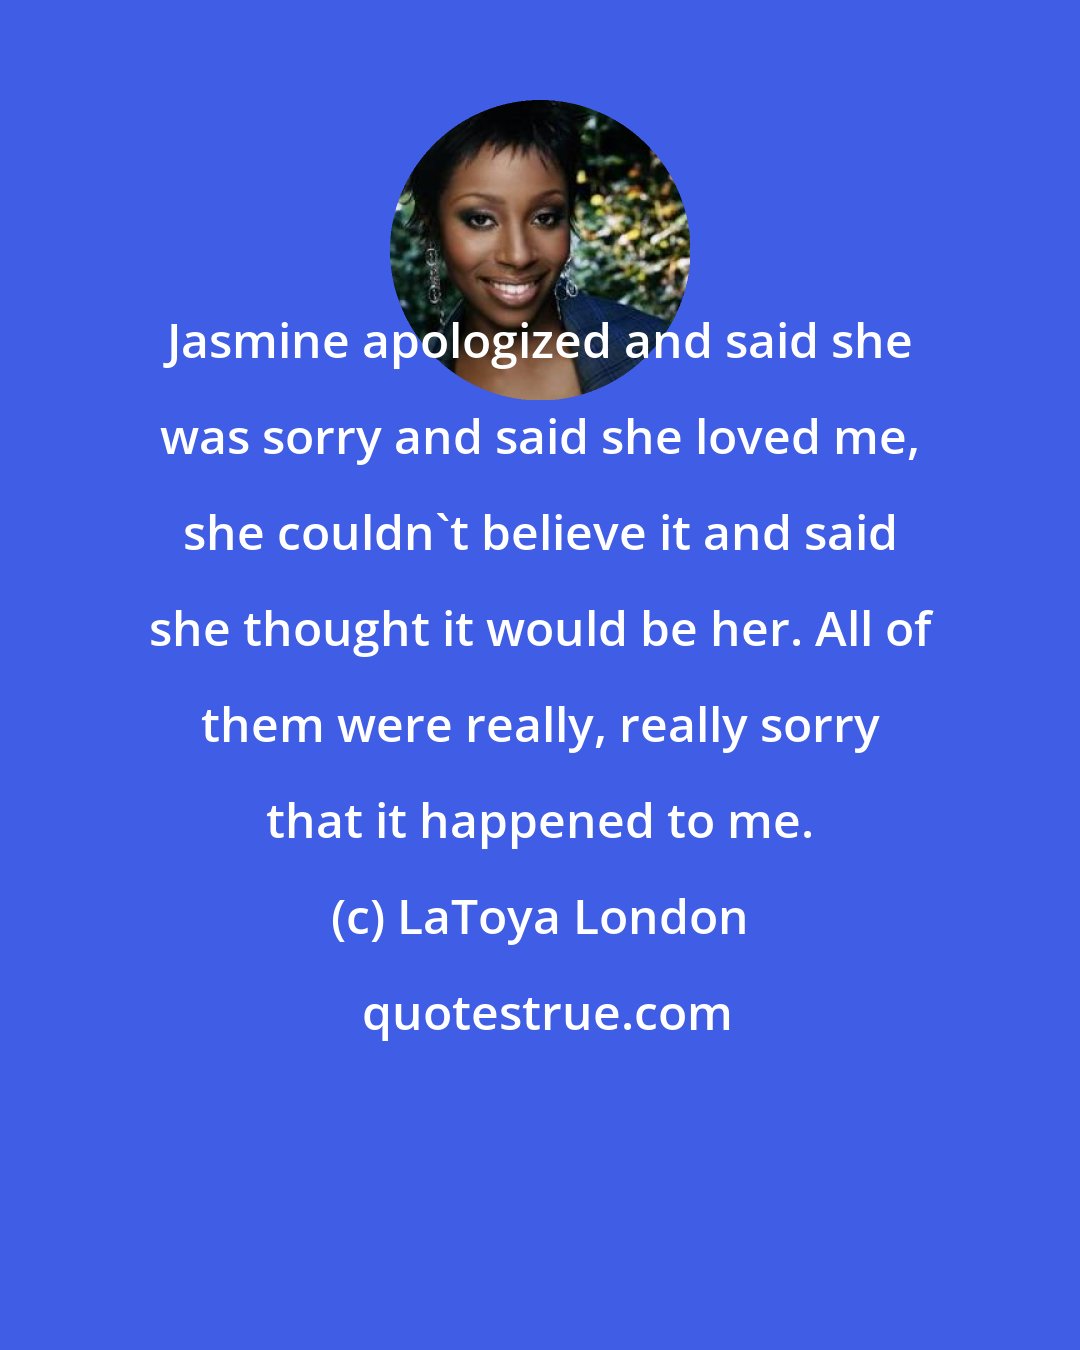 LaToya London: Jasmine apologized and said she was sorry and said she loved me, she couldn't believe it and said she thought it would be her. All of them were really, really sorry that it happened to me.